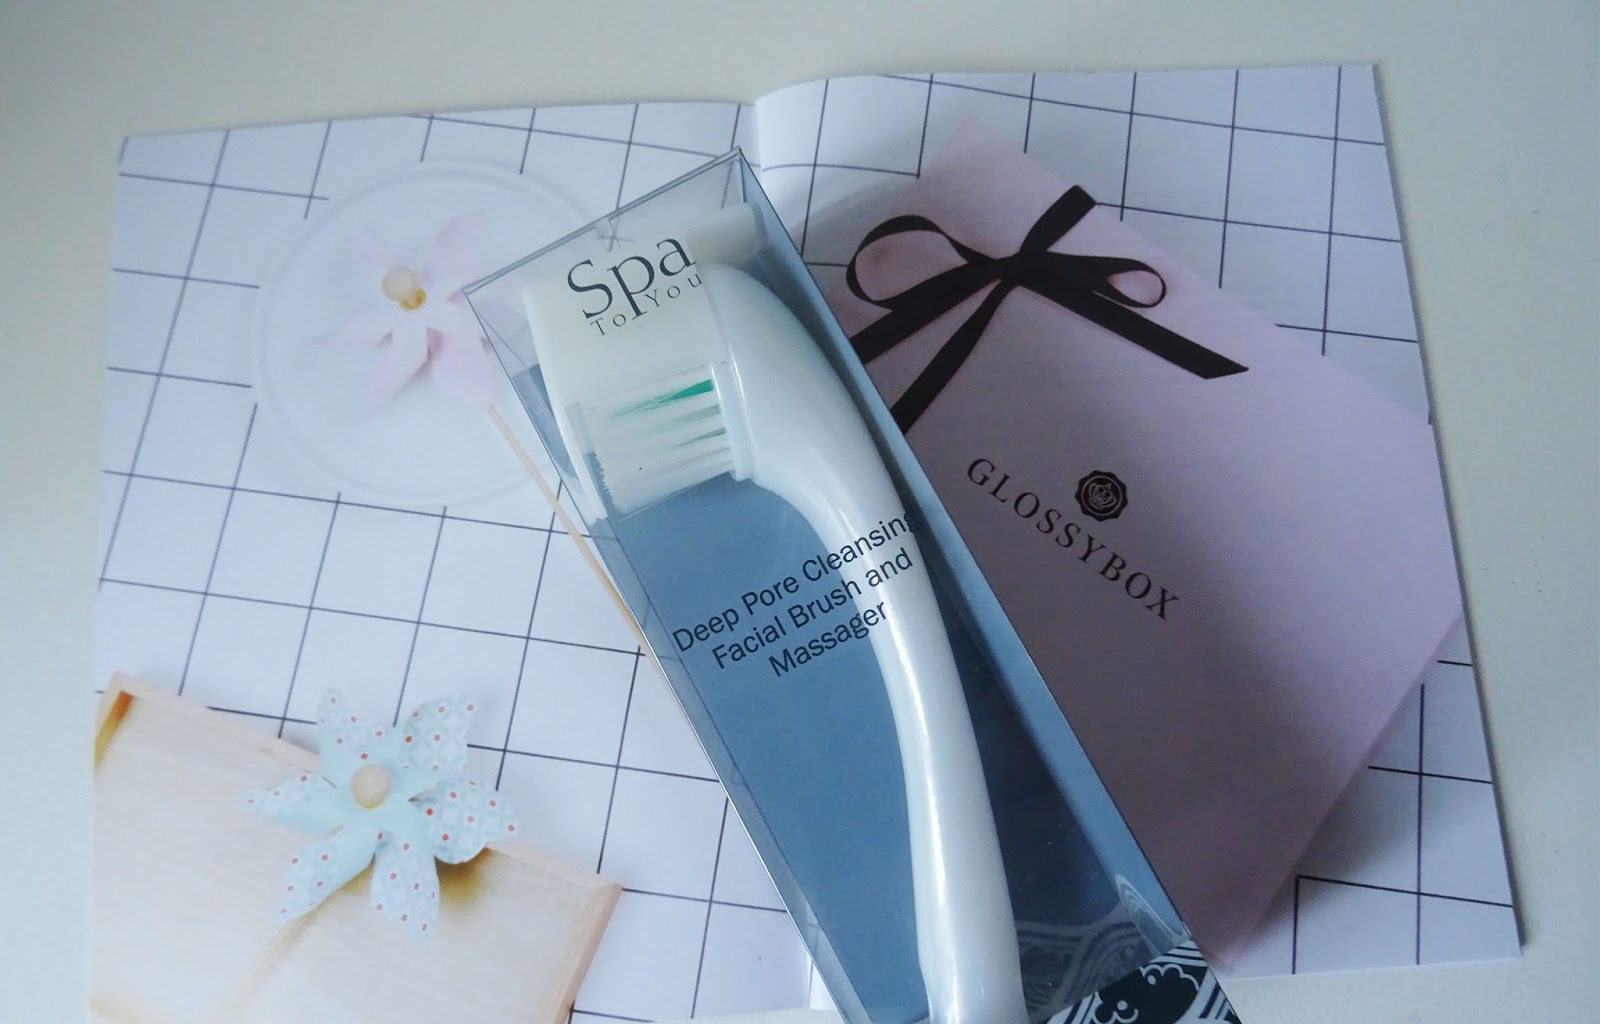 Glossybox simply beautiful Spa to you, Deep pore cleansing Facial Brush and Massage